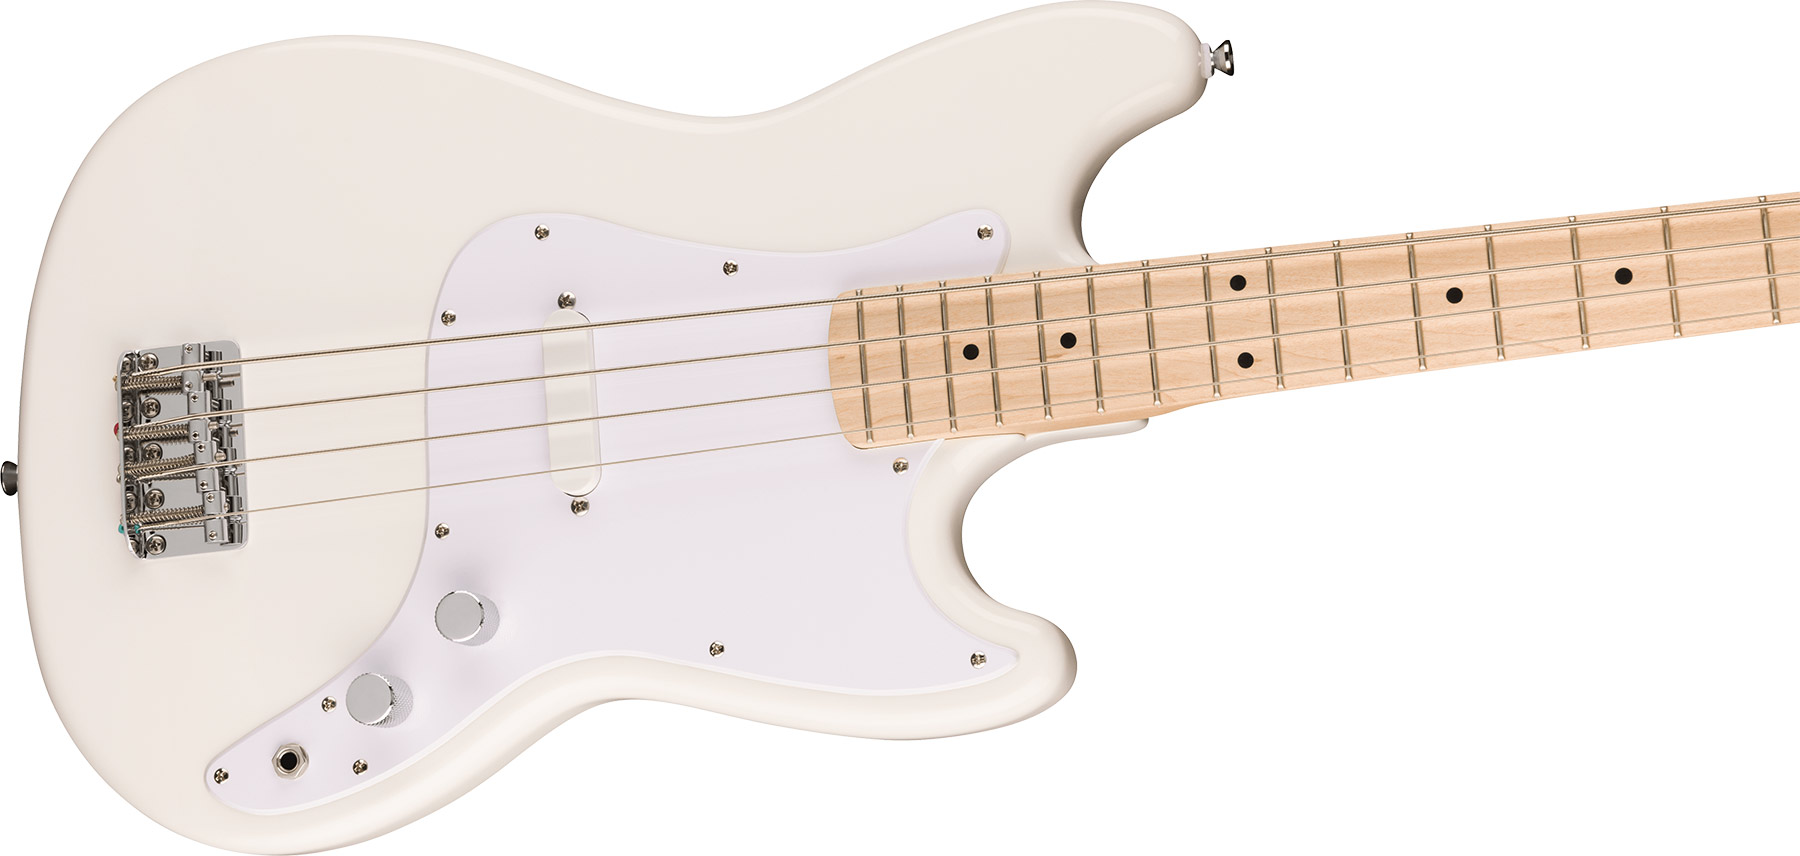 Squier Bronco Bass Sonic Mn - Arctic White - Solid body electric bass - Variation 2